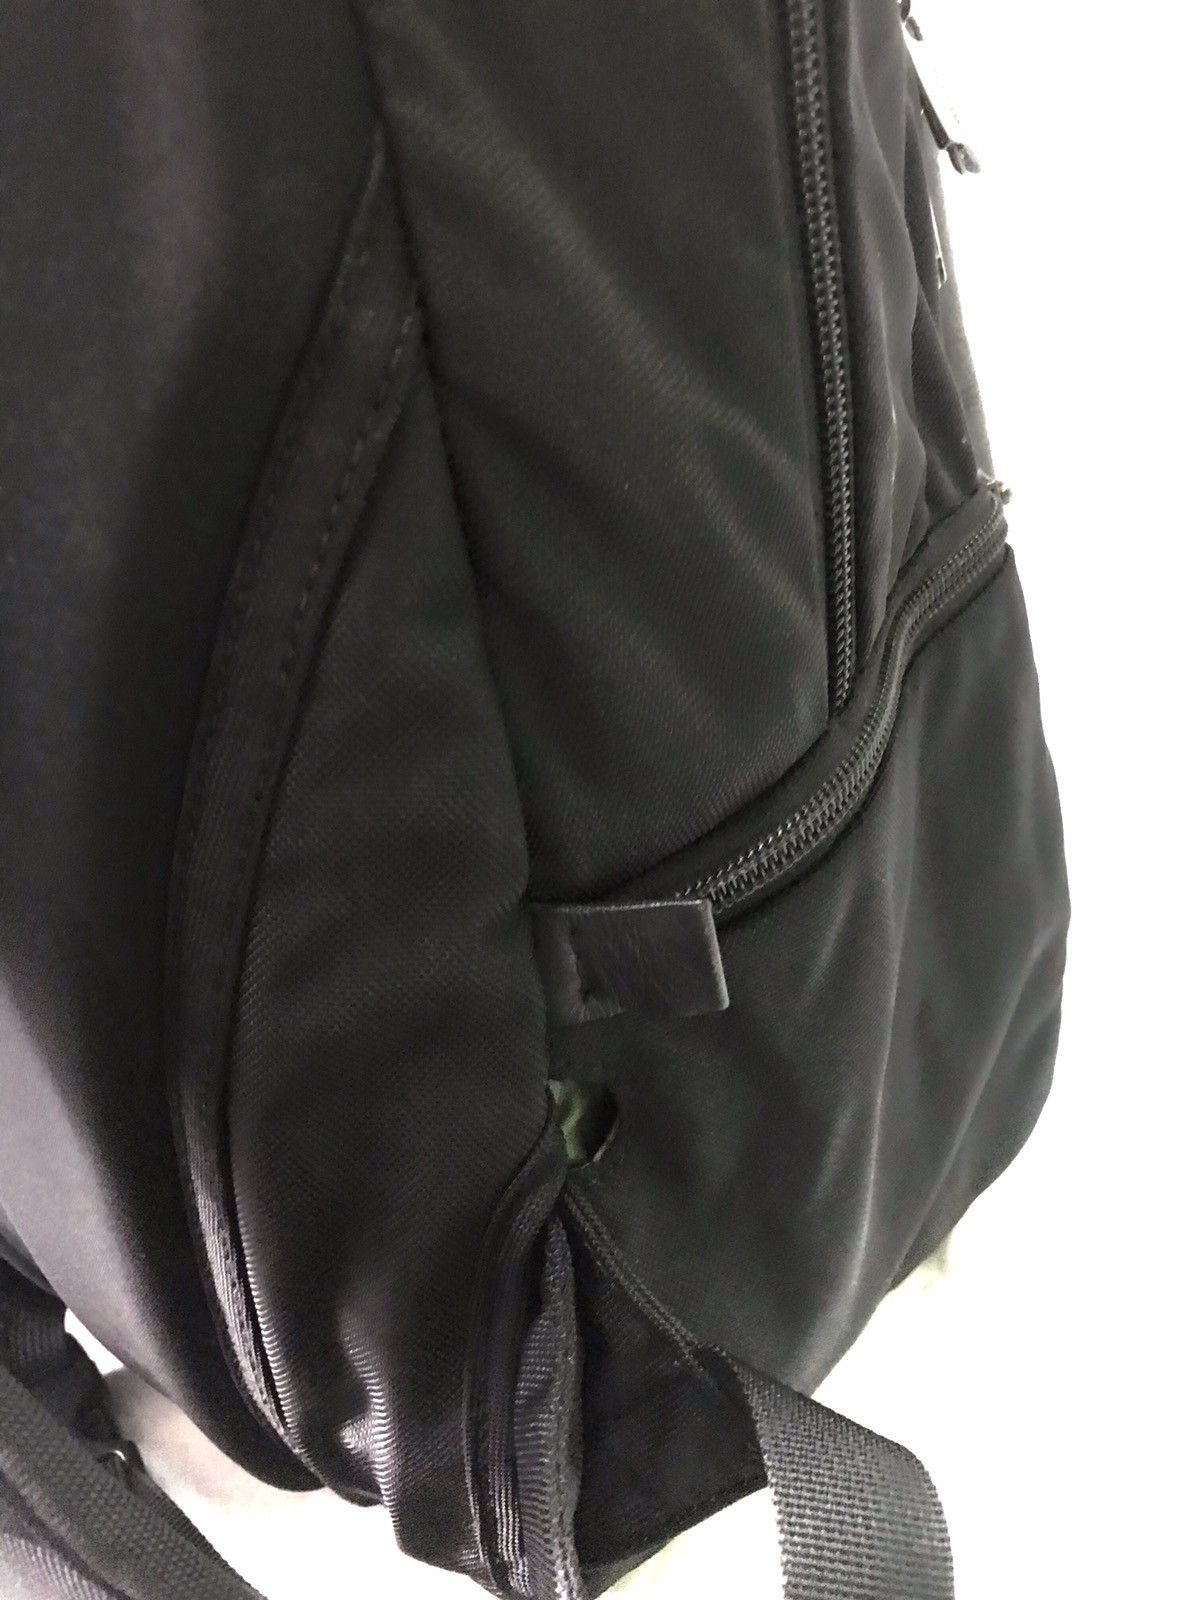 Authentic Gregory Laptop Size Backpack - 10